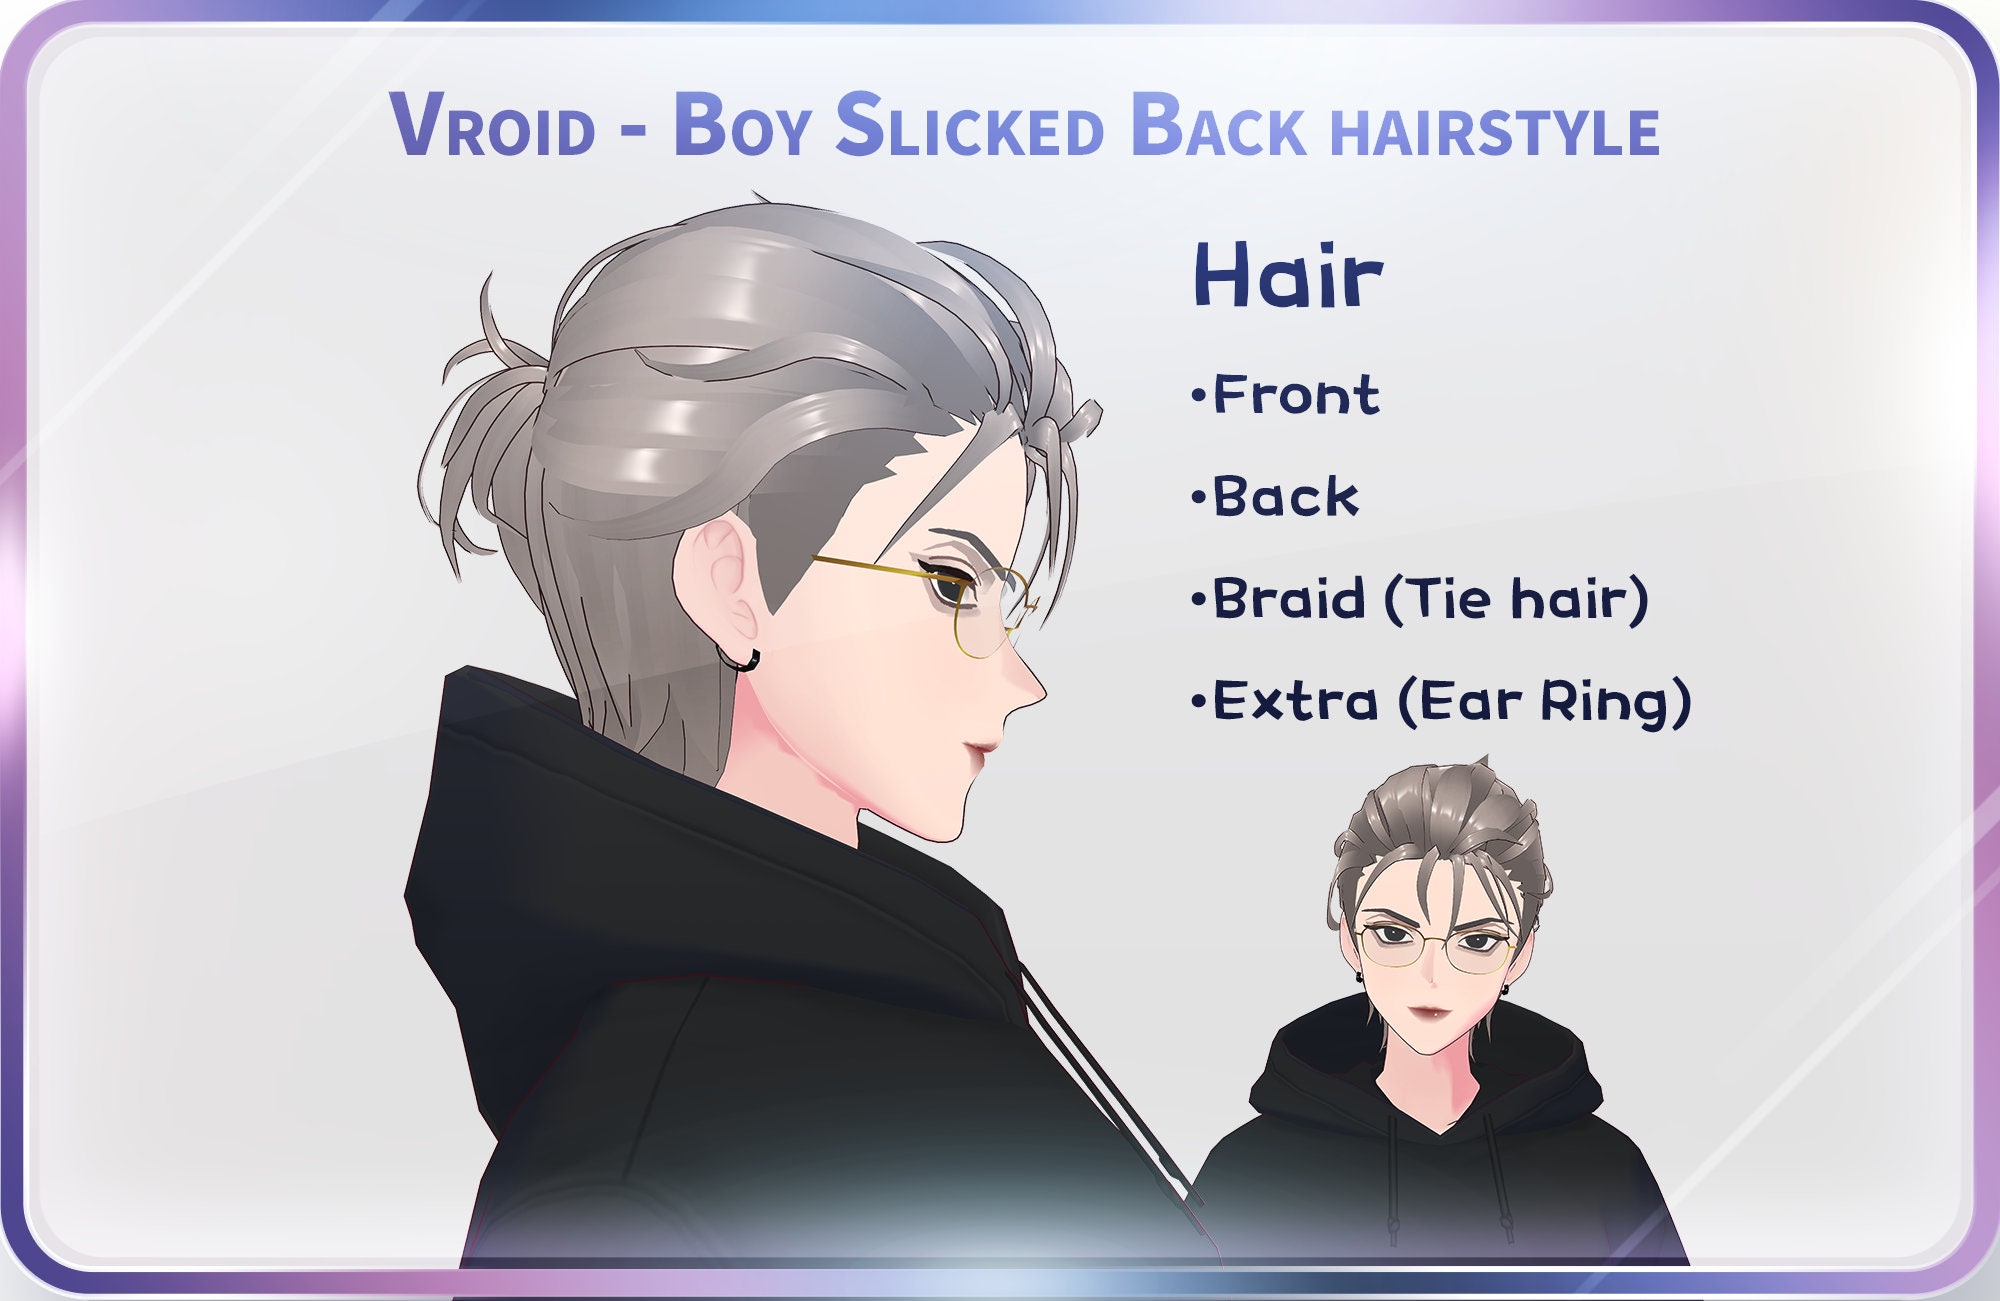 Hair style for man